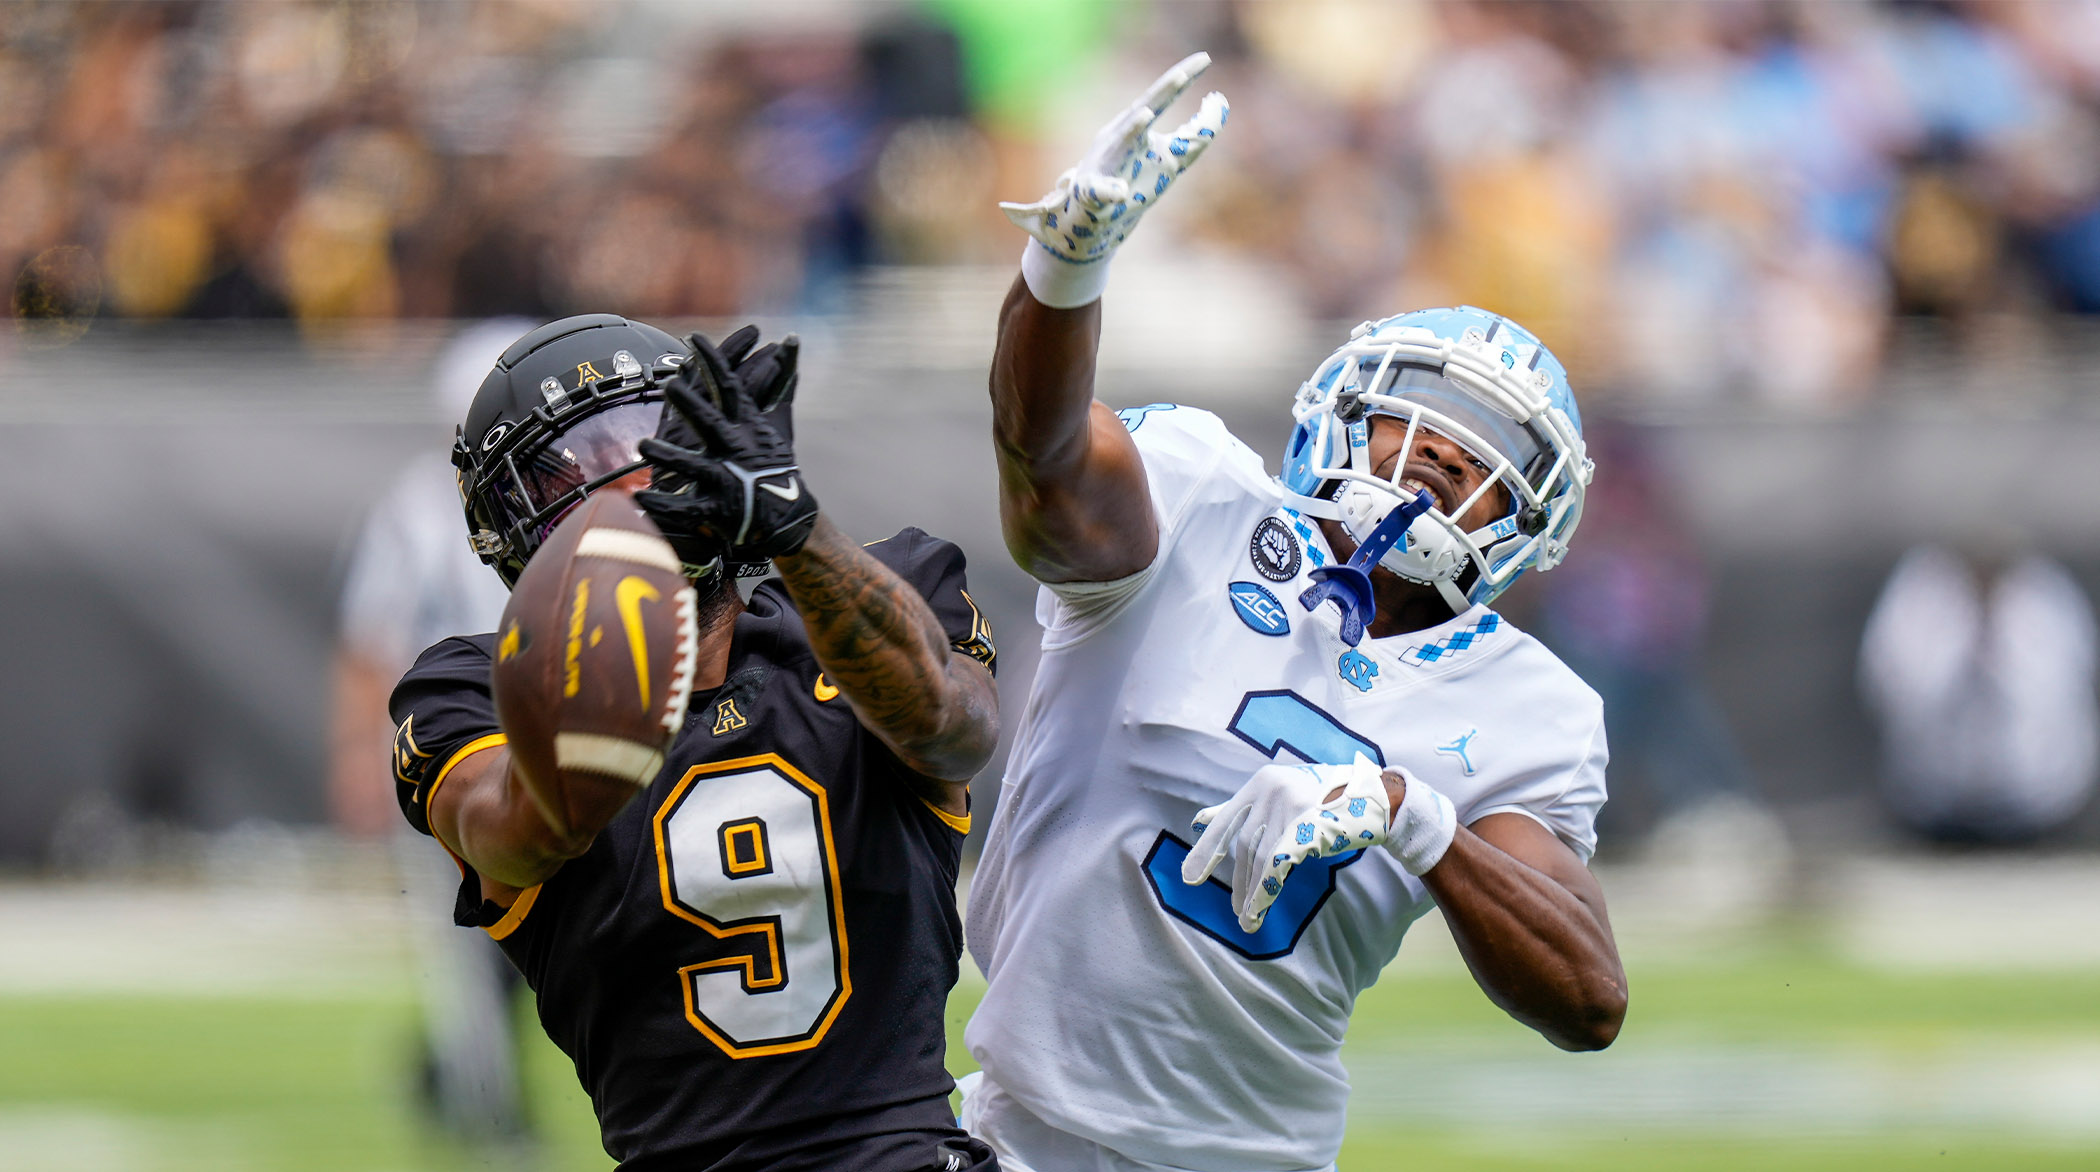 CFB World Reacts to App State’s Loss to UNC Despite 40-Point 4Q - Sports Illustrated